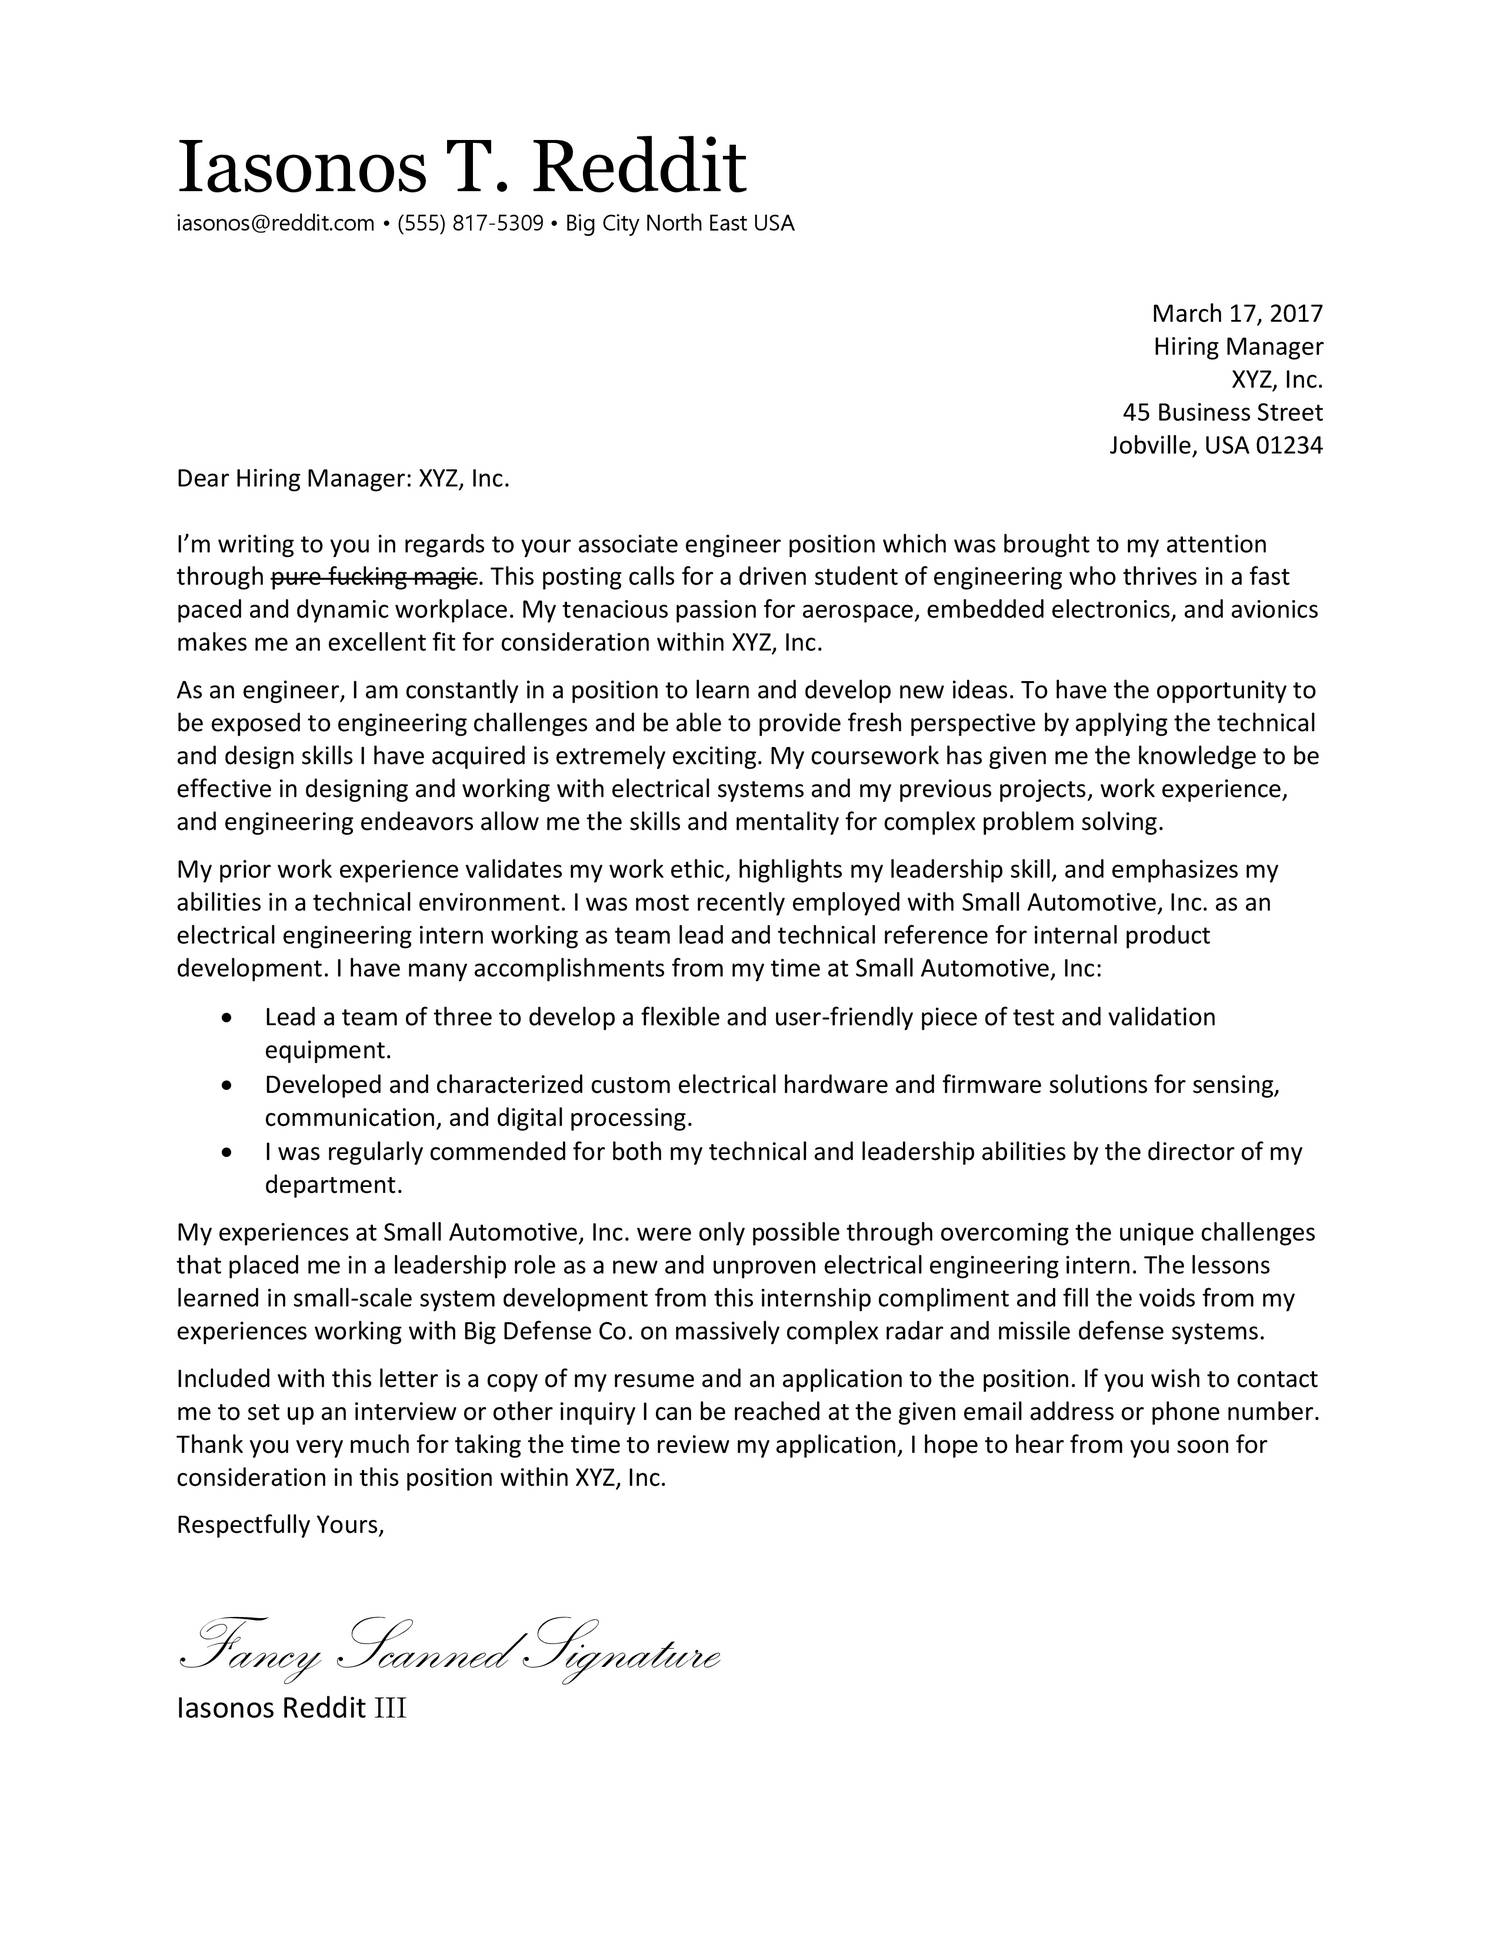 Cover Letter Example Reddit / Maybe you would like to learn more about